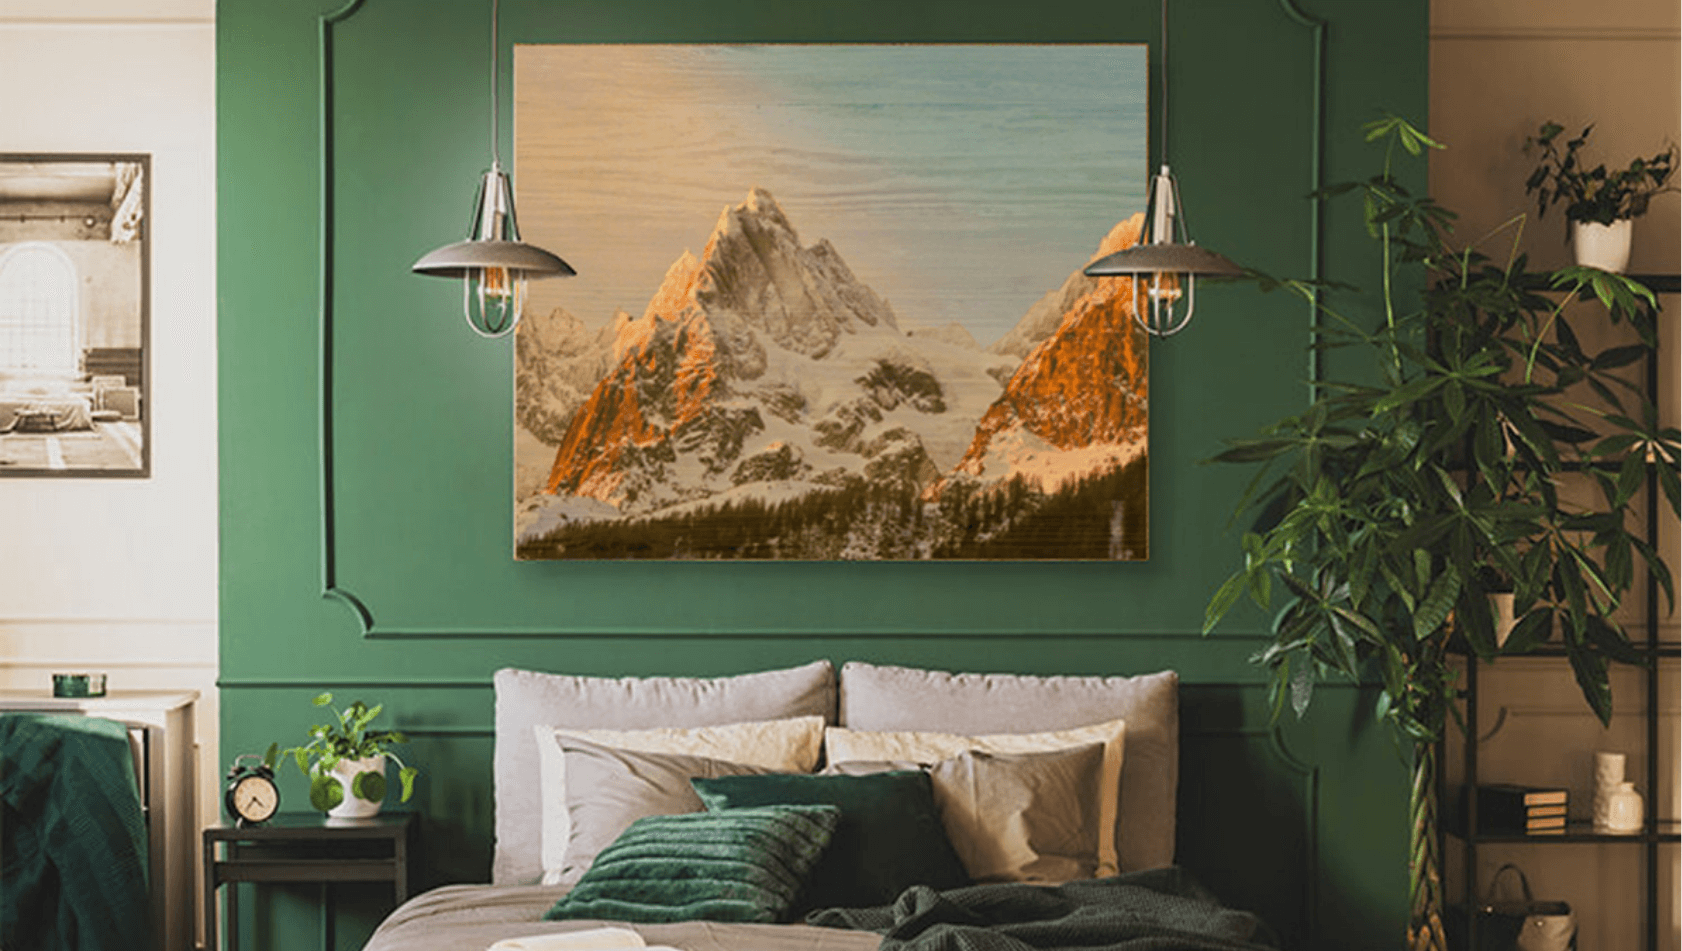 picture of mountain tops hanging on wall with 2 hanging lamps on either side, a bed with cushions beneath the picture.